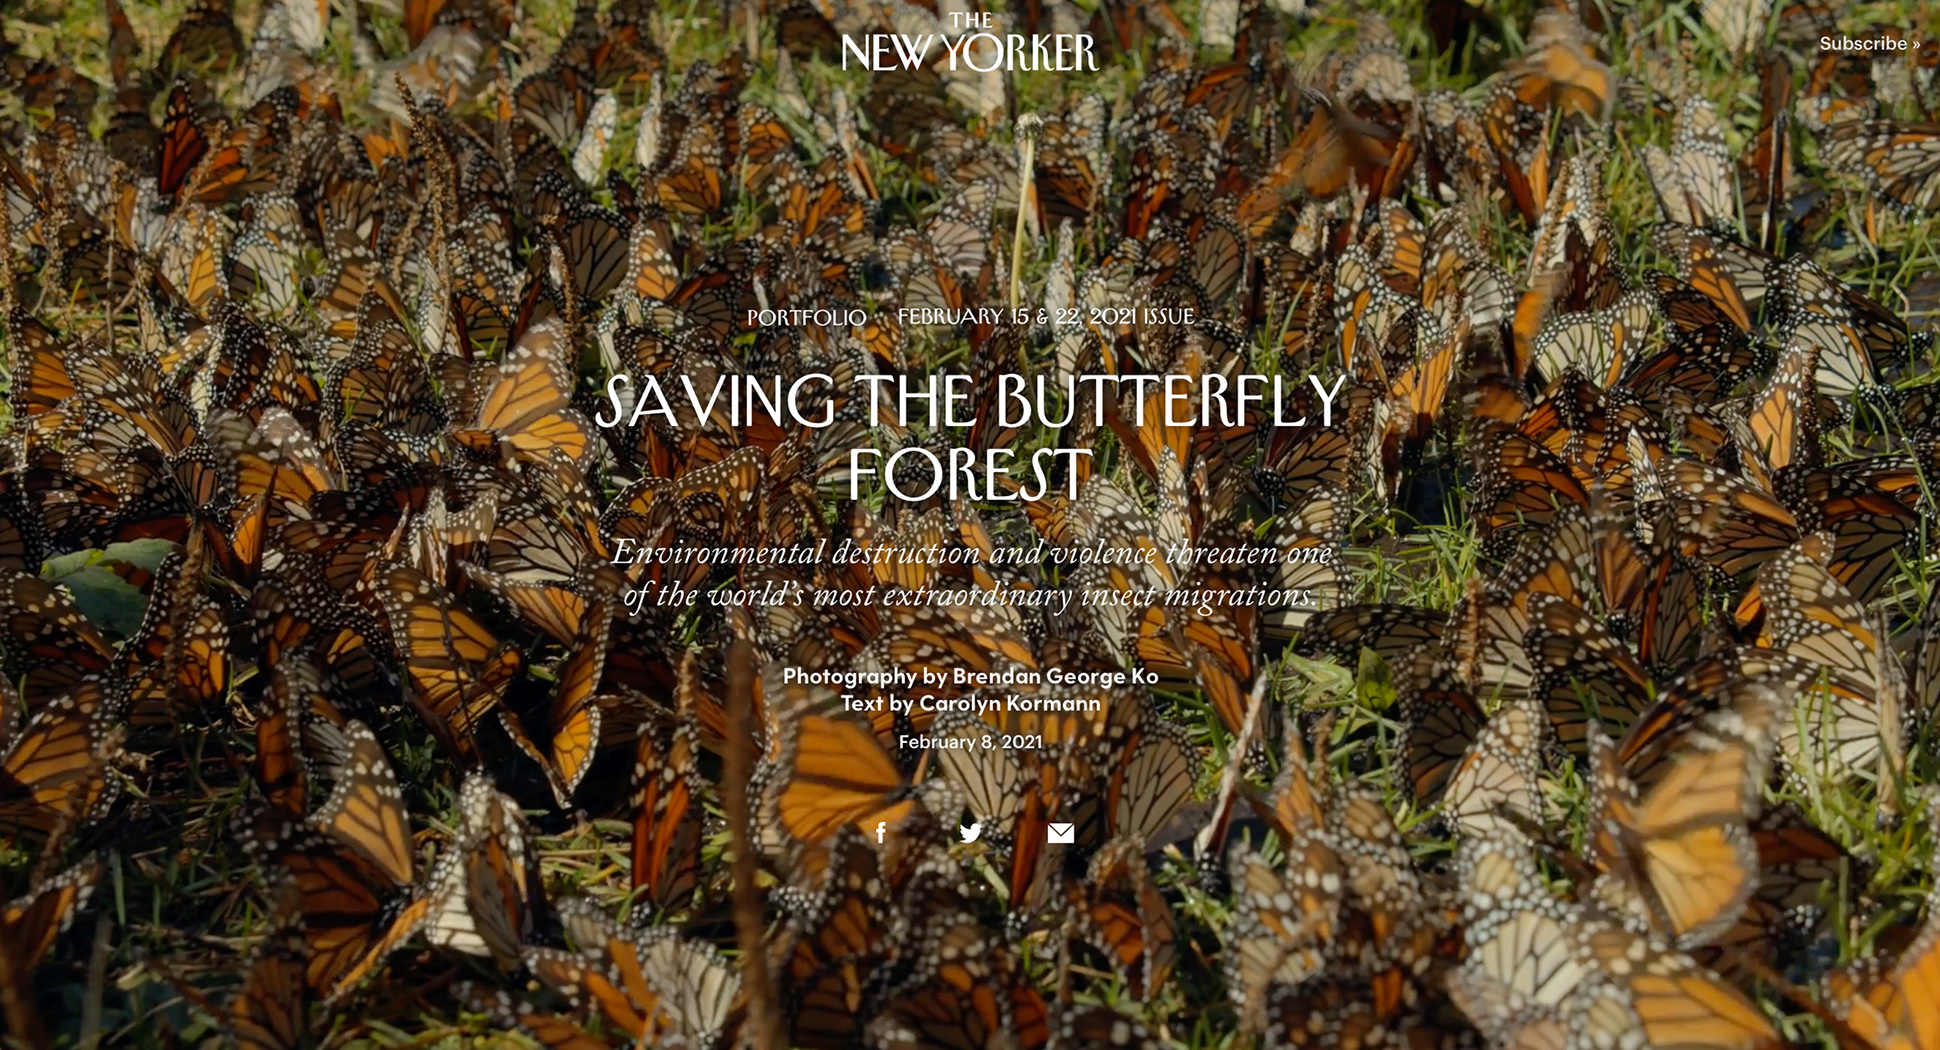 “Saving the Butterfly Forest," photographs by Brendan George Ko, February 8 at newyorker.com